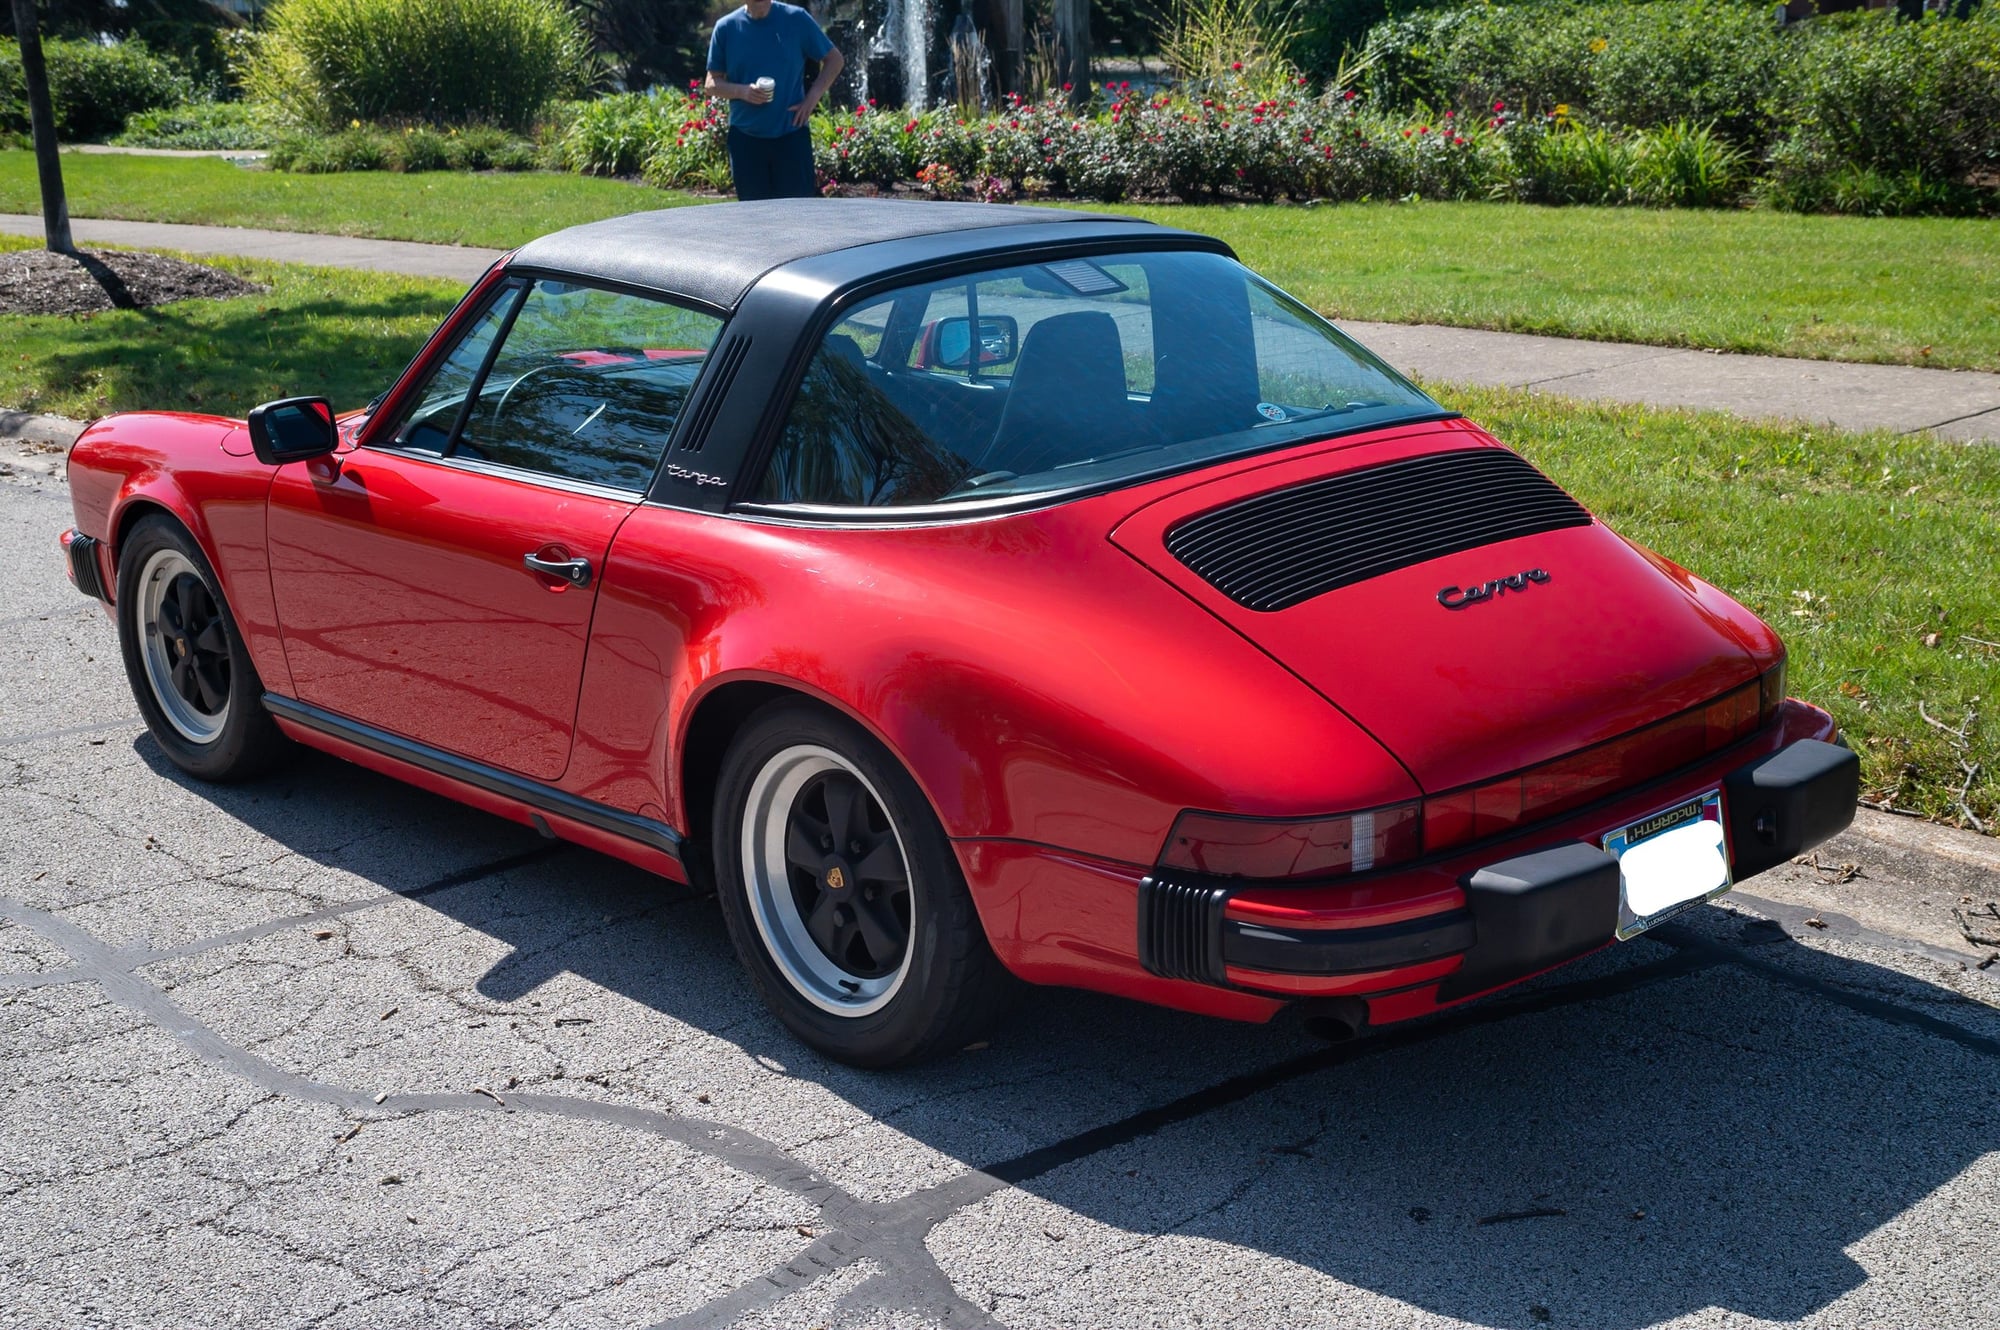 1988 Porsche 911 - 1988 Porsche 911 Targa One Owner 44,826miles - Used - VIN WP0EB091XJS161134 - 44,826 Miles - 6 cyl - 2WD - Manual - Convertible - Red - Northbrook, IL 60062, United States